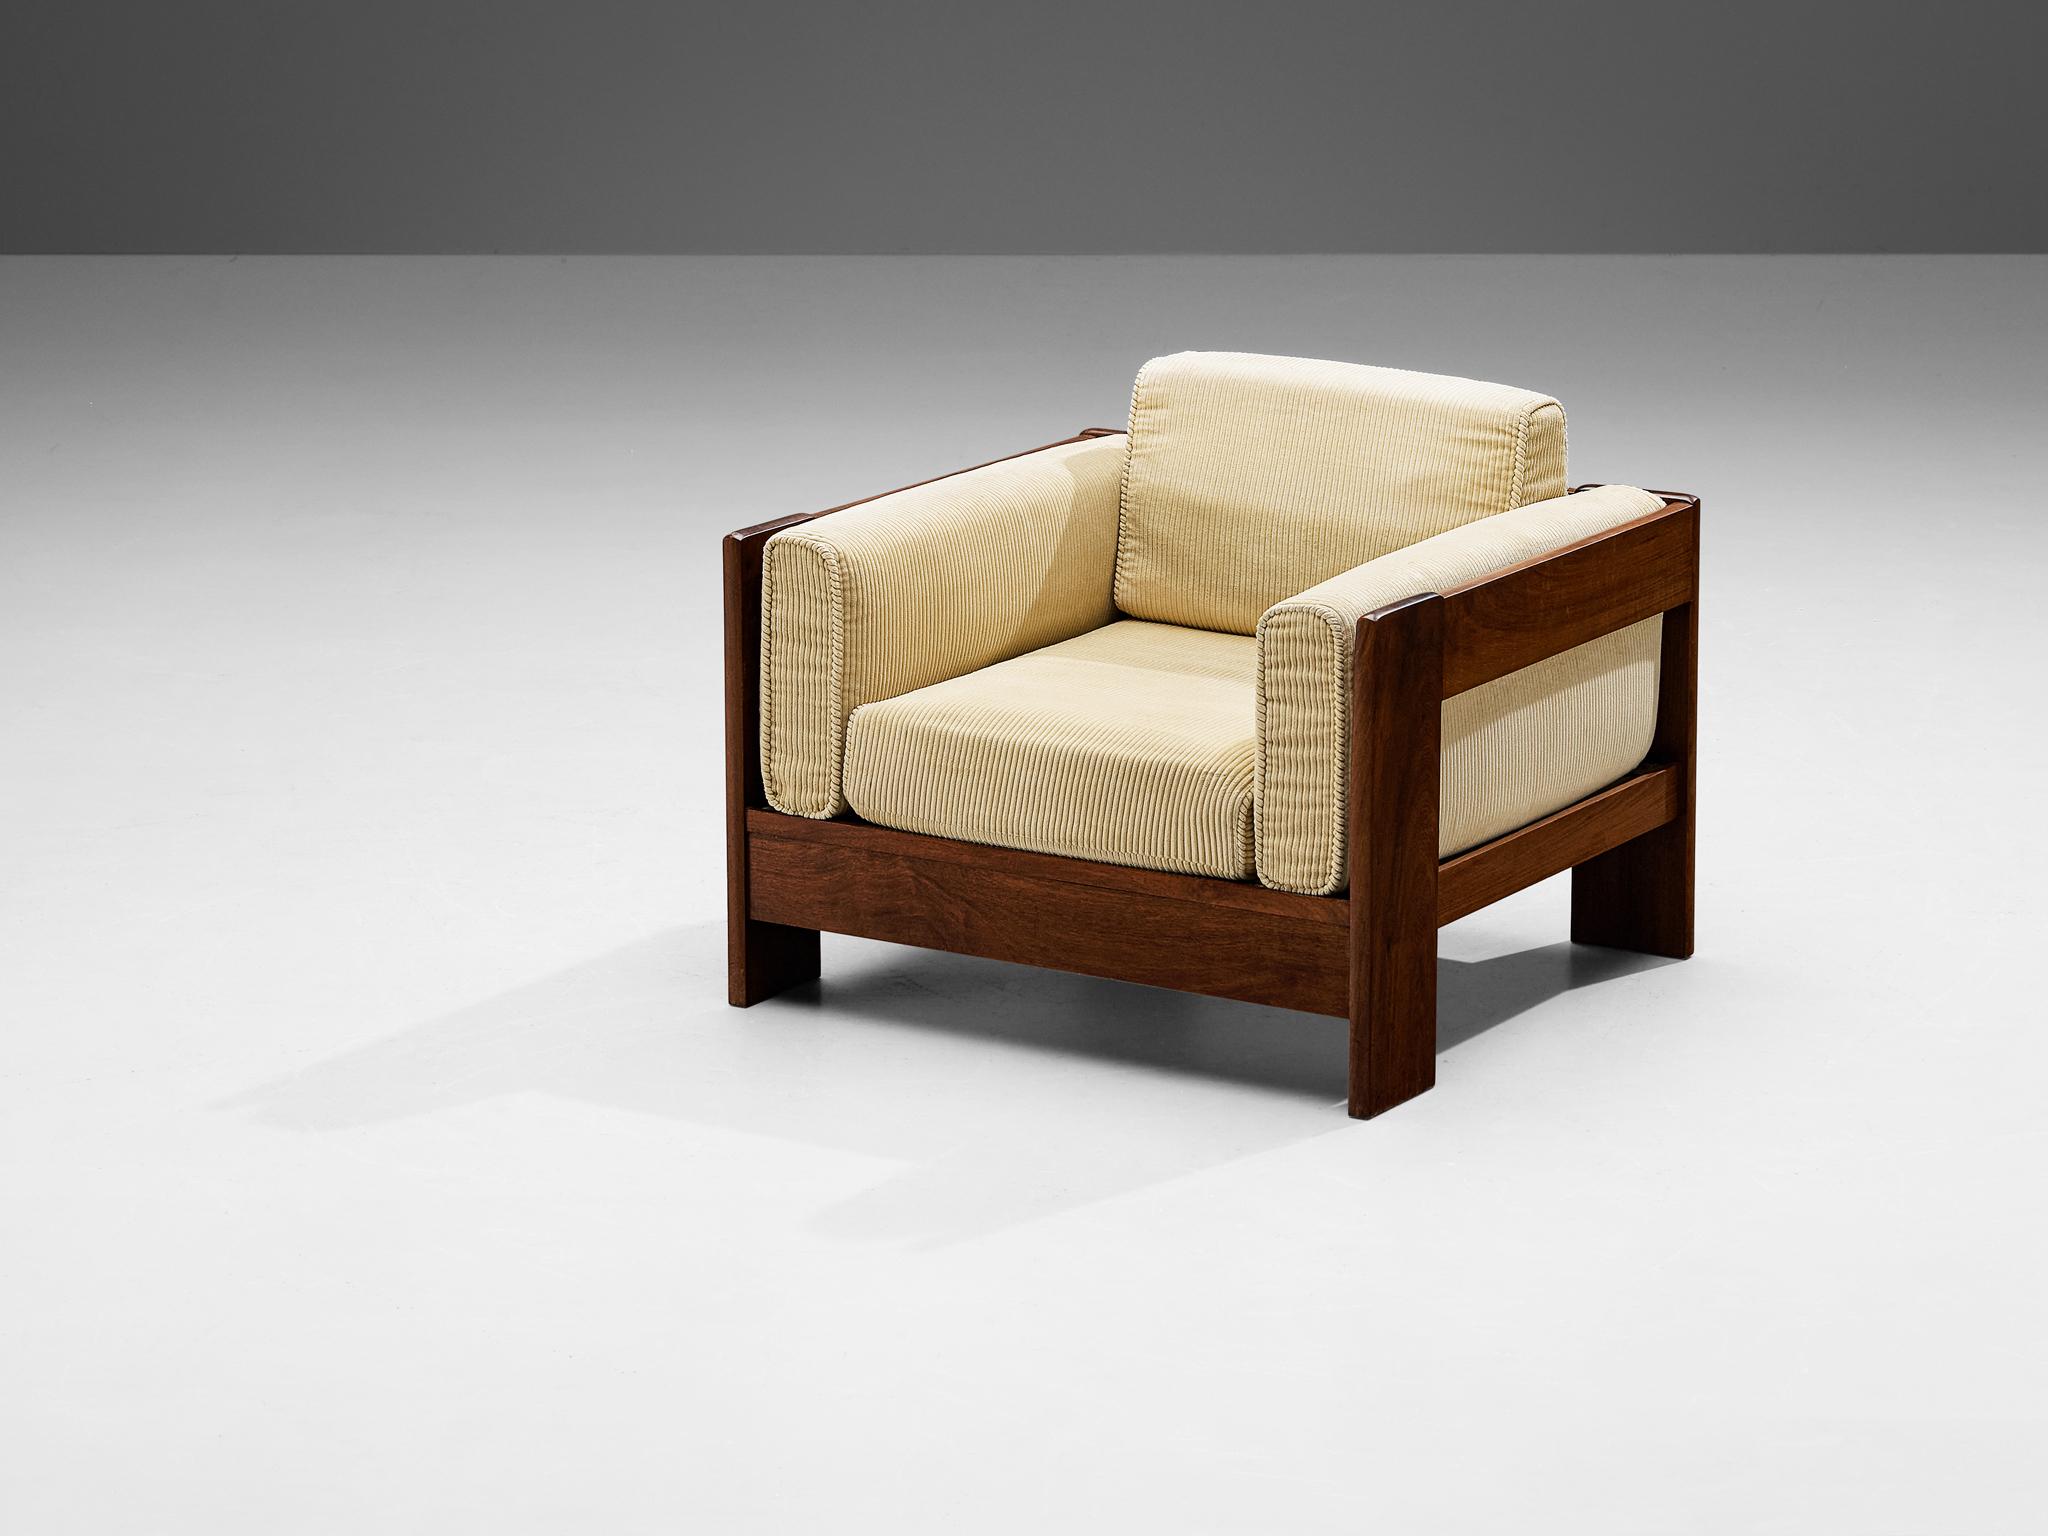 Easy chair, walnut, corduroy, Italy, 1970s

This streamlined armchair truly intensifies the experience of sitting itself and is a standout in any modern room. The framework is well-designed featuring clear lines and geometrical shapes and strongly